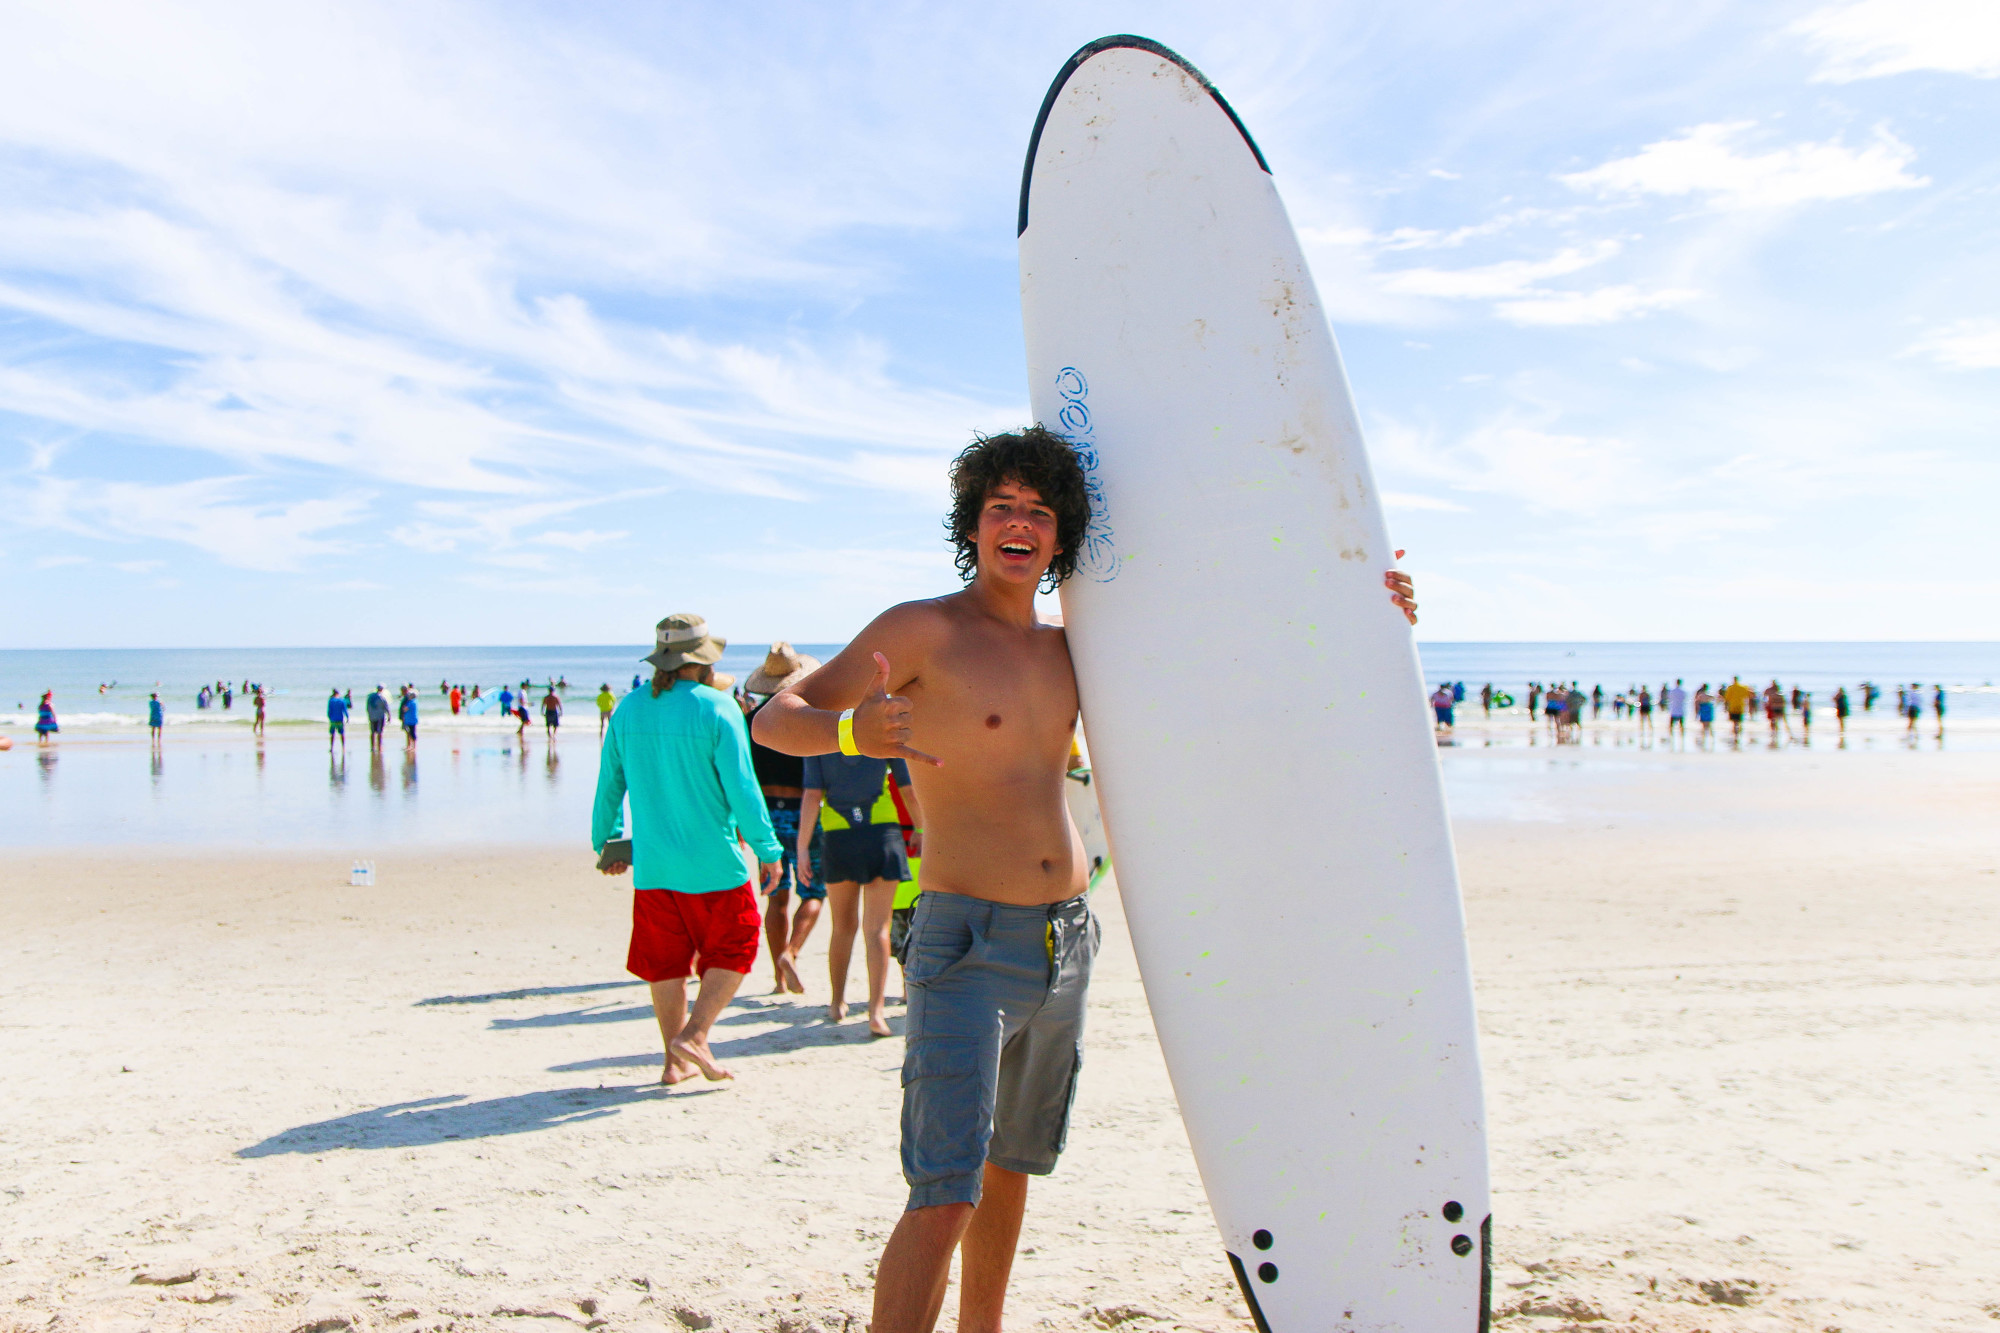 Bunnell resident Sean McKenney, 16, poses with a surfboard after his catches some waves. Photo by Paige Wilson